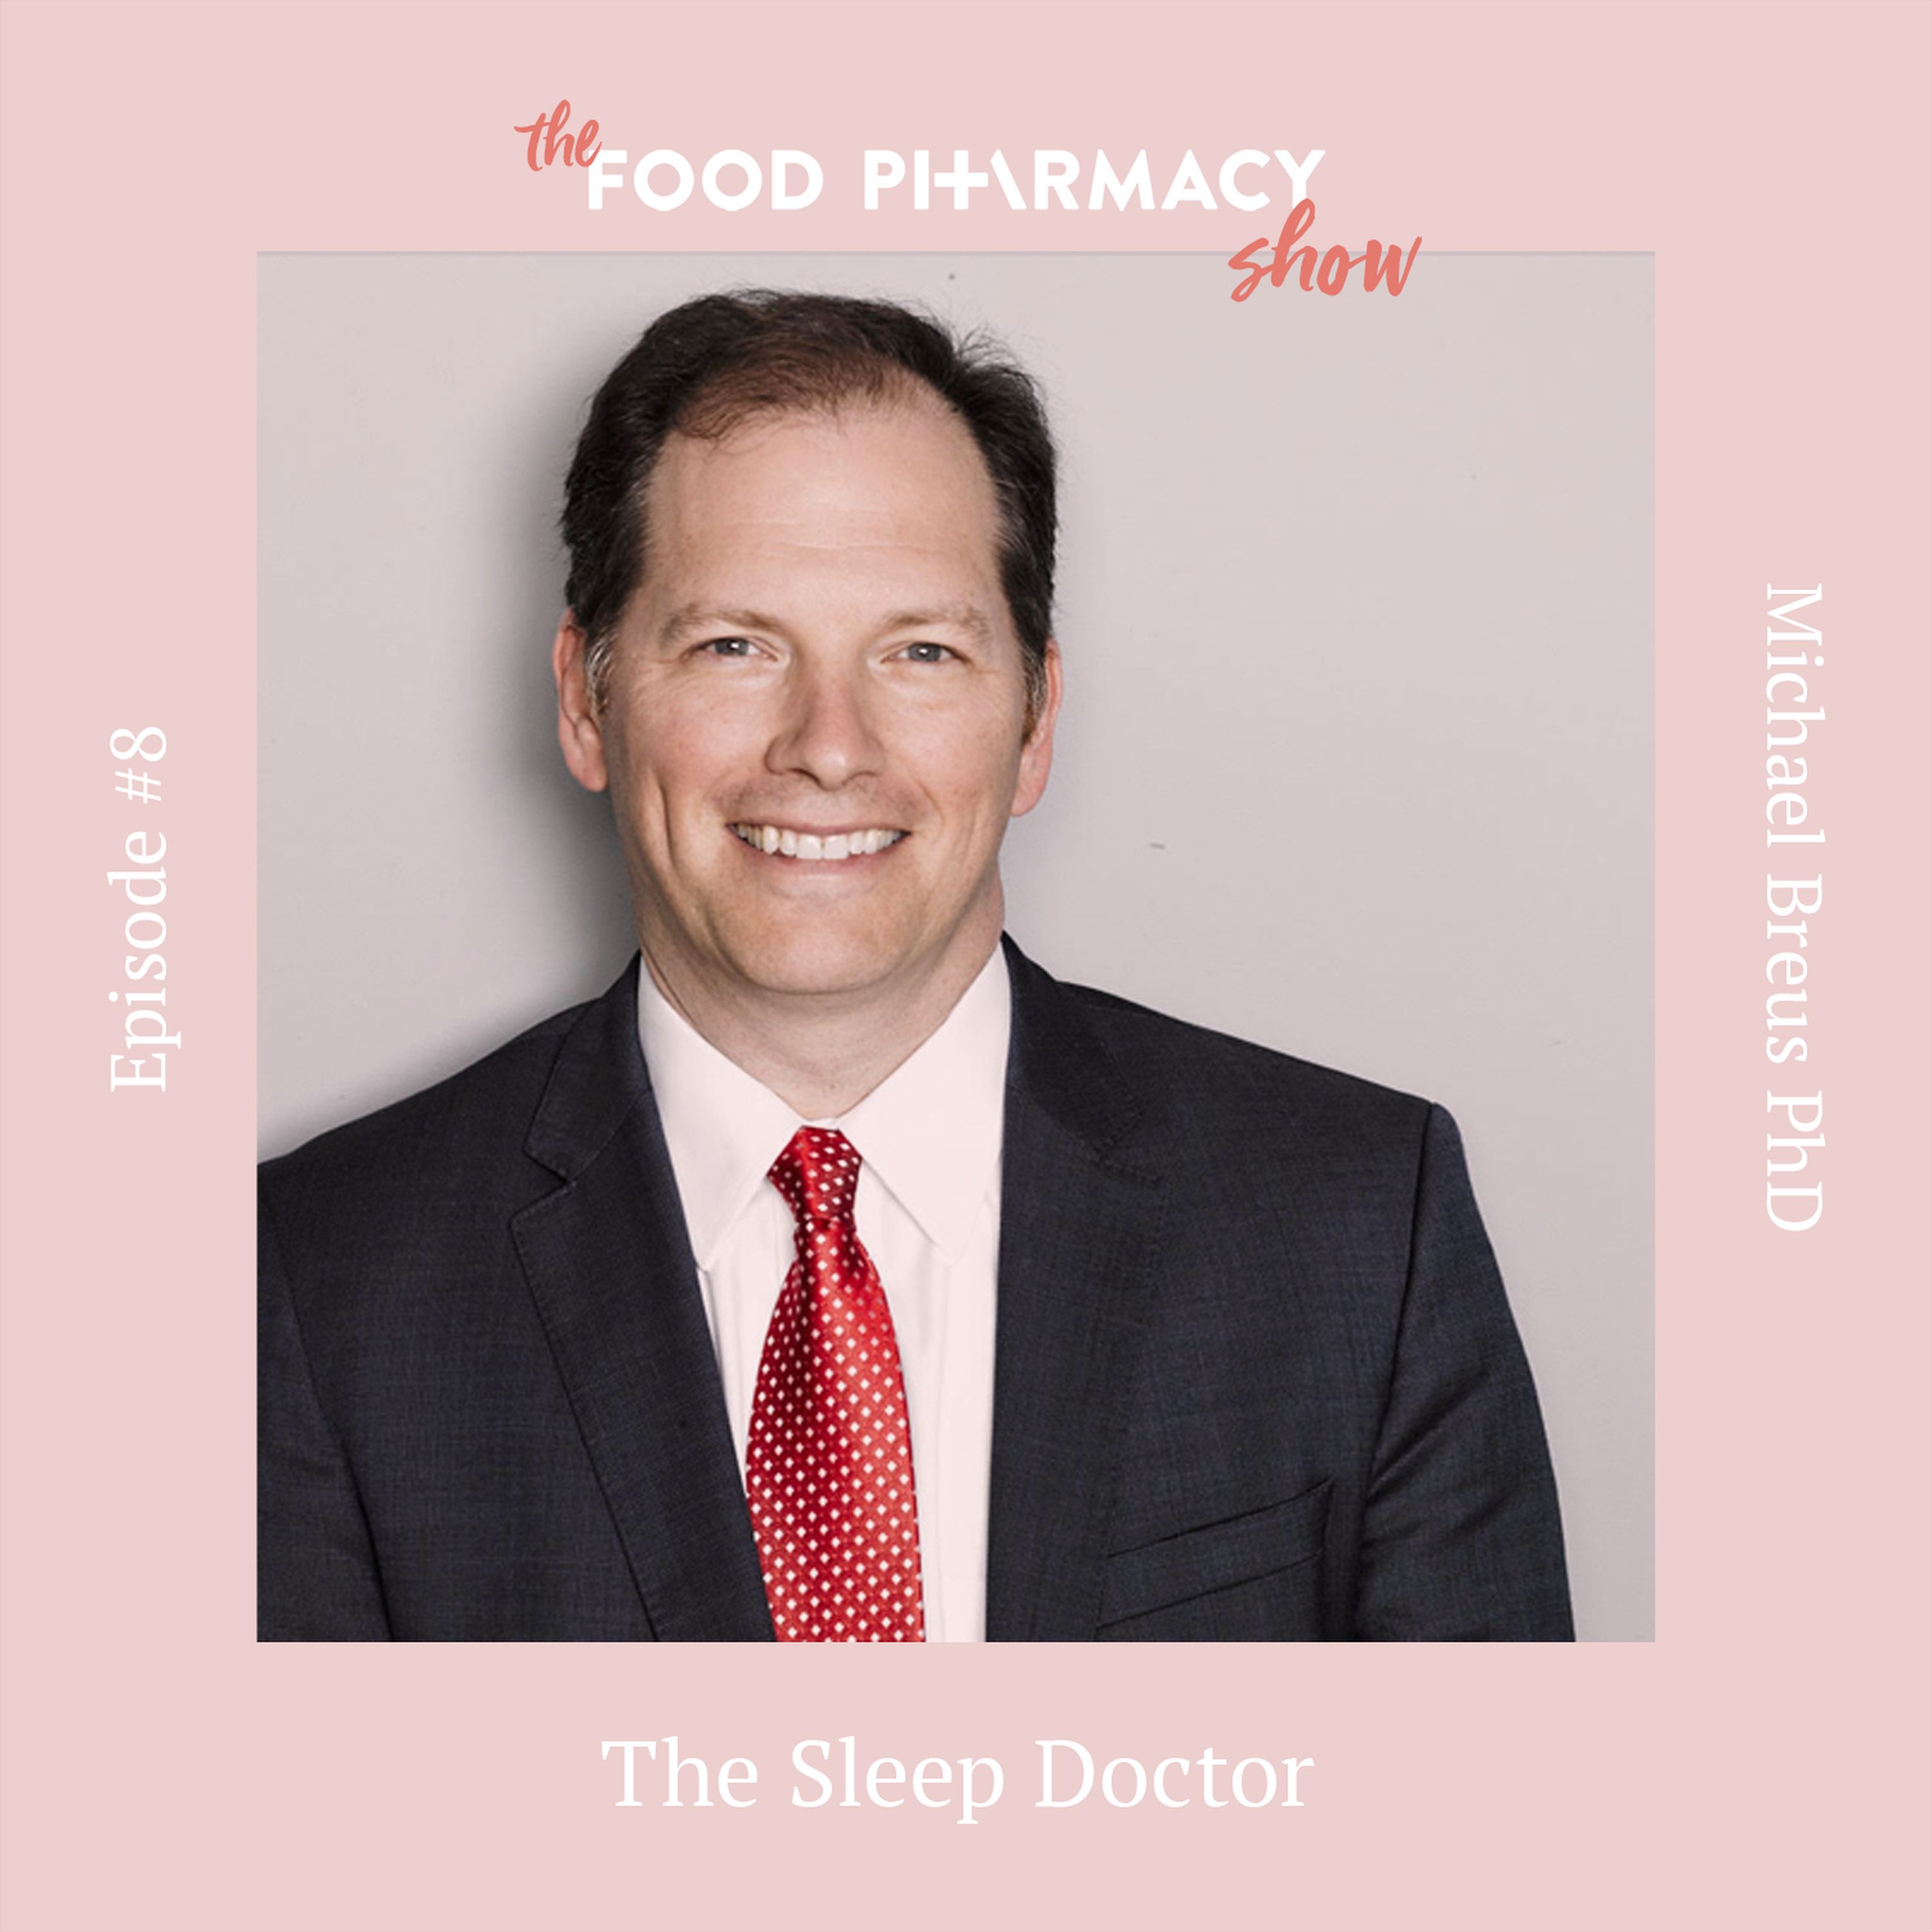 8. Michael Breus PhD, aka the Sleep Doctor - the quality of your sleep affects almost everything in your life